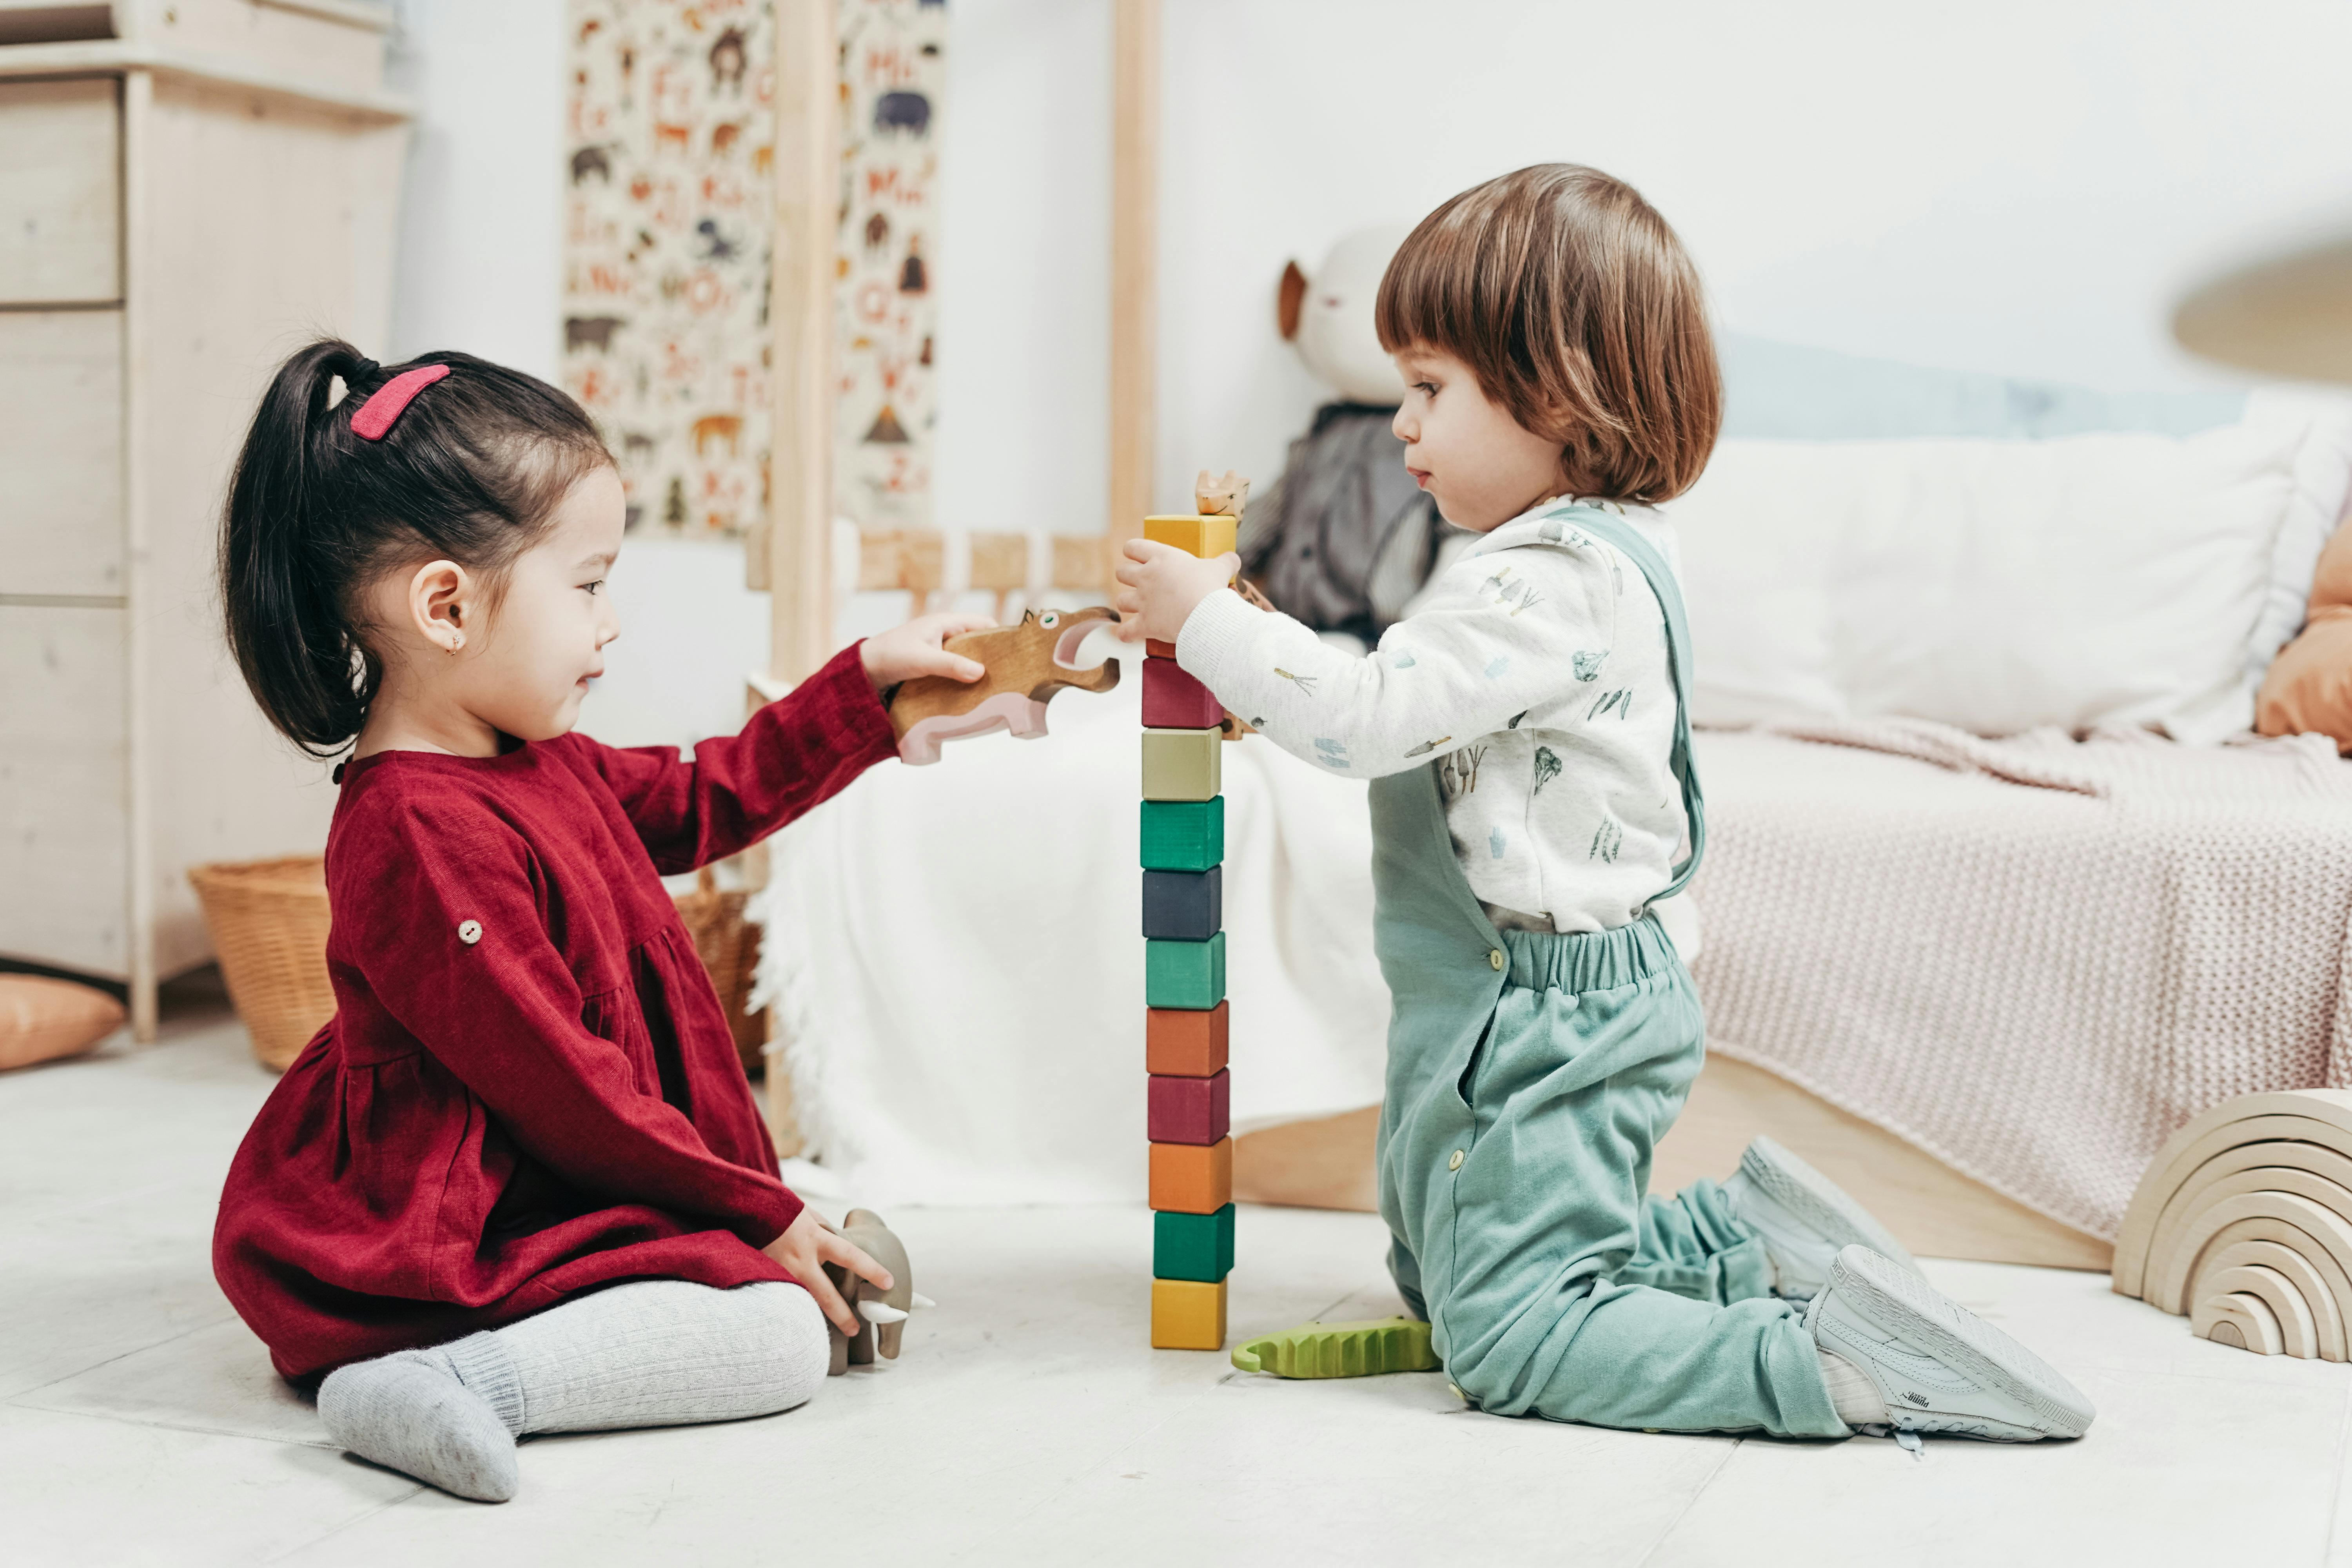  Toddlers playing with blocks